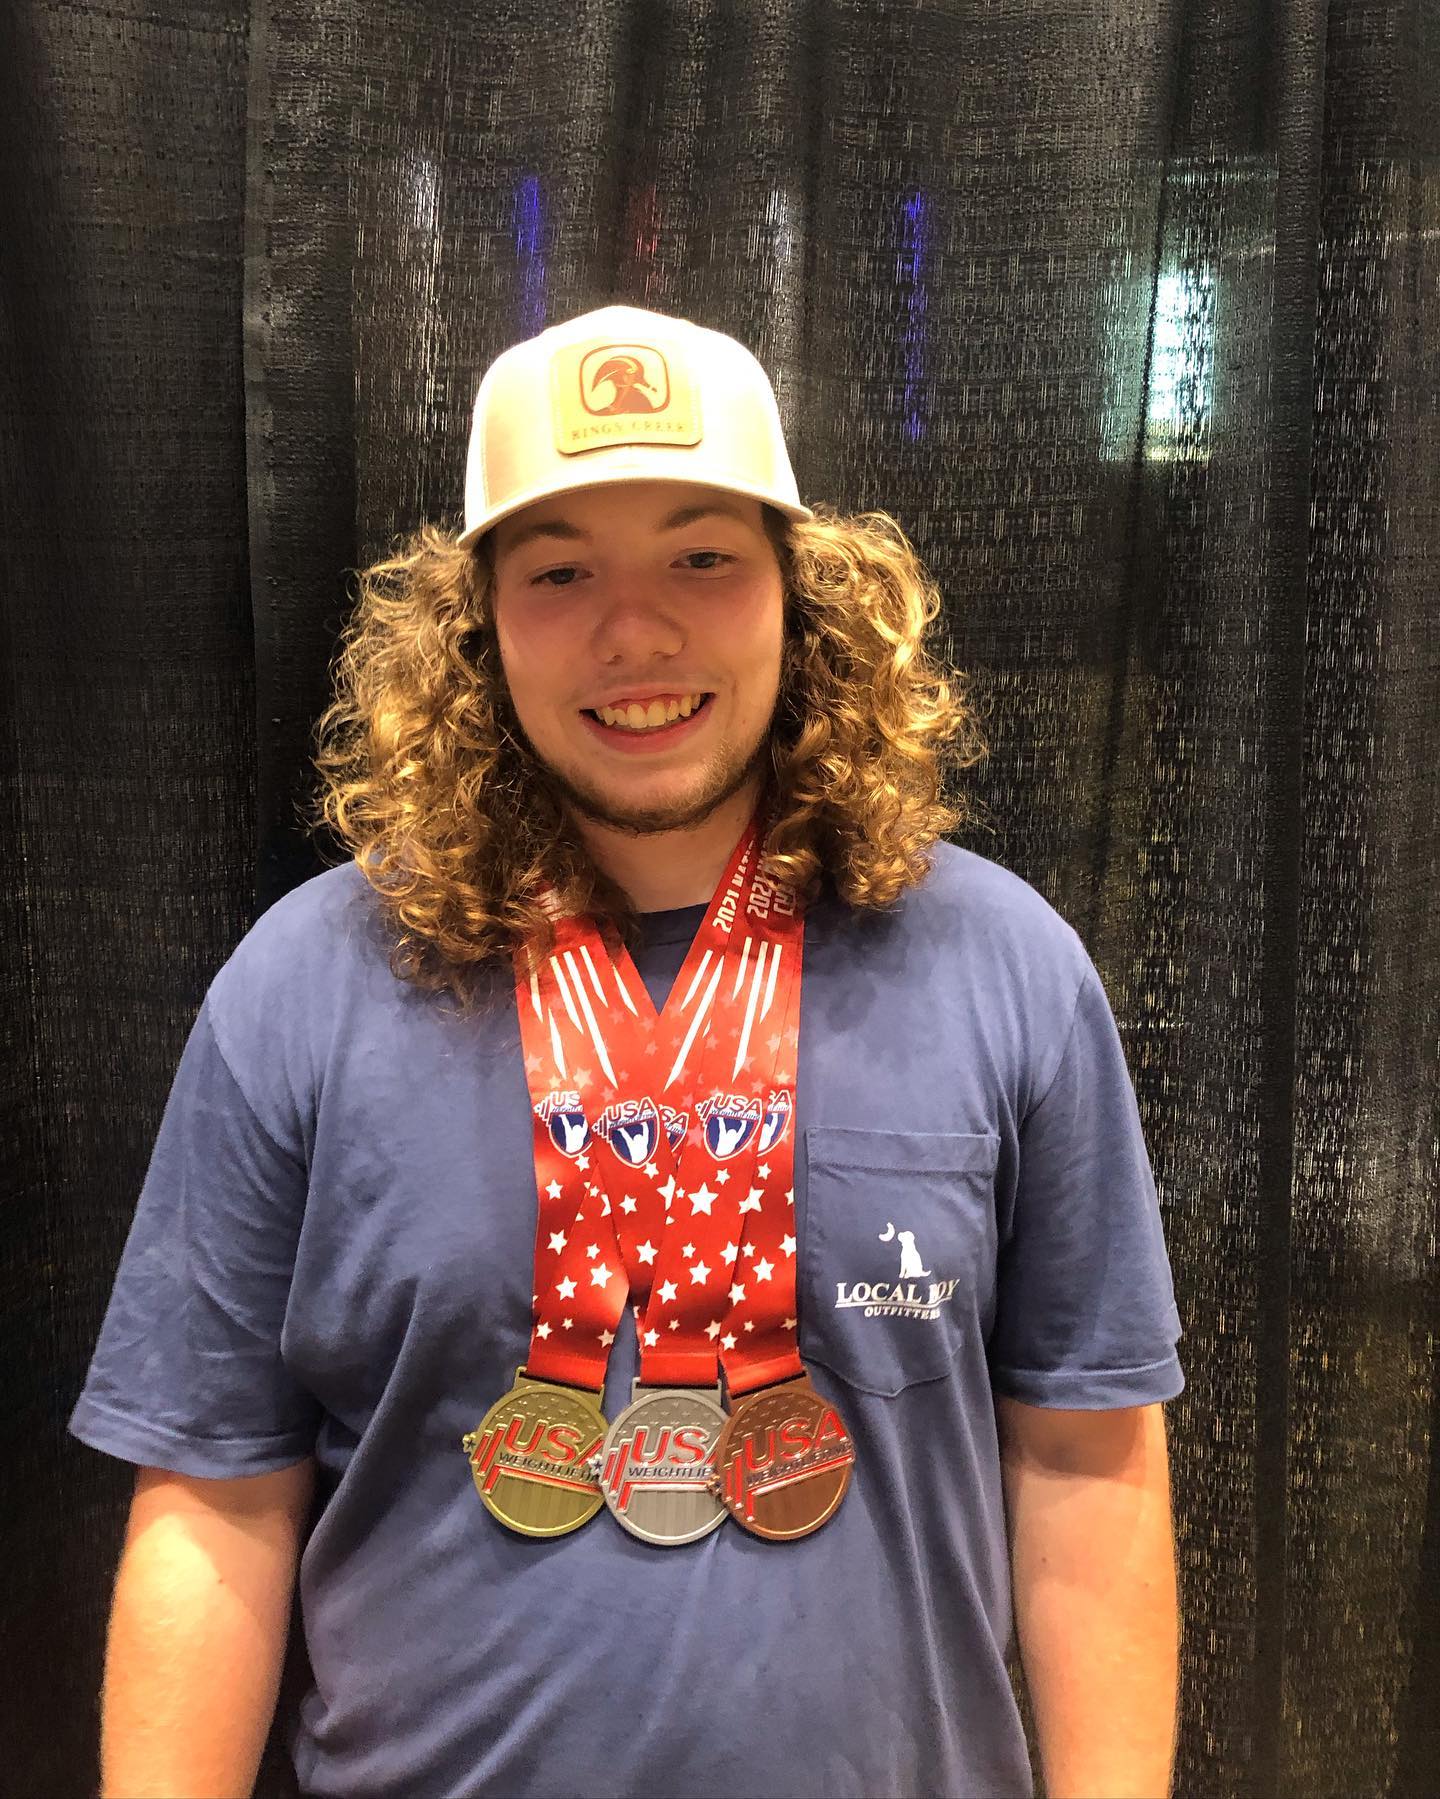 Ian Graham, a 17-year-old Beaufort native, won gold in the Clean & Jerk (131 kg), bronze in the Snatch (107 kg) and silver Overall (238 kg) – all personal records – in the 102-kilogram weight class of the Youth National Championships this week in Detroit.